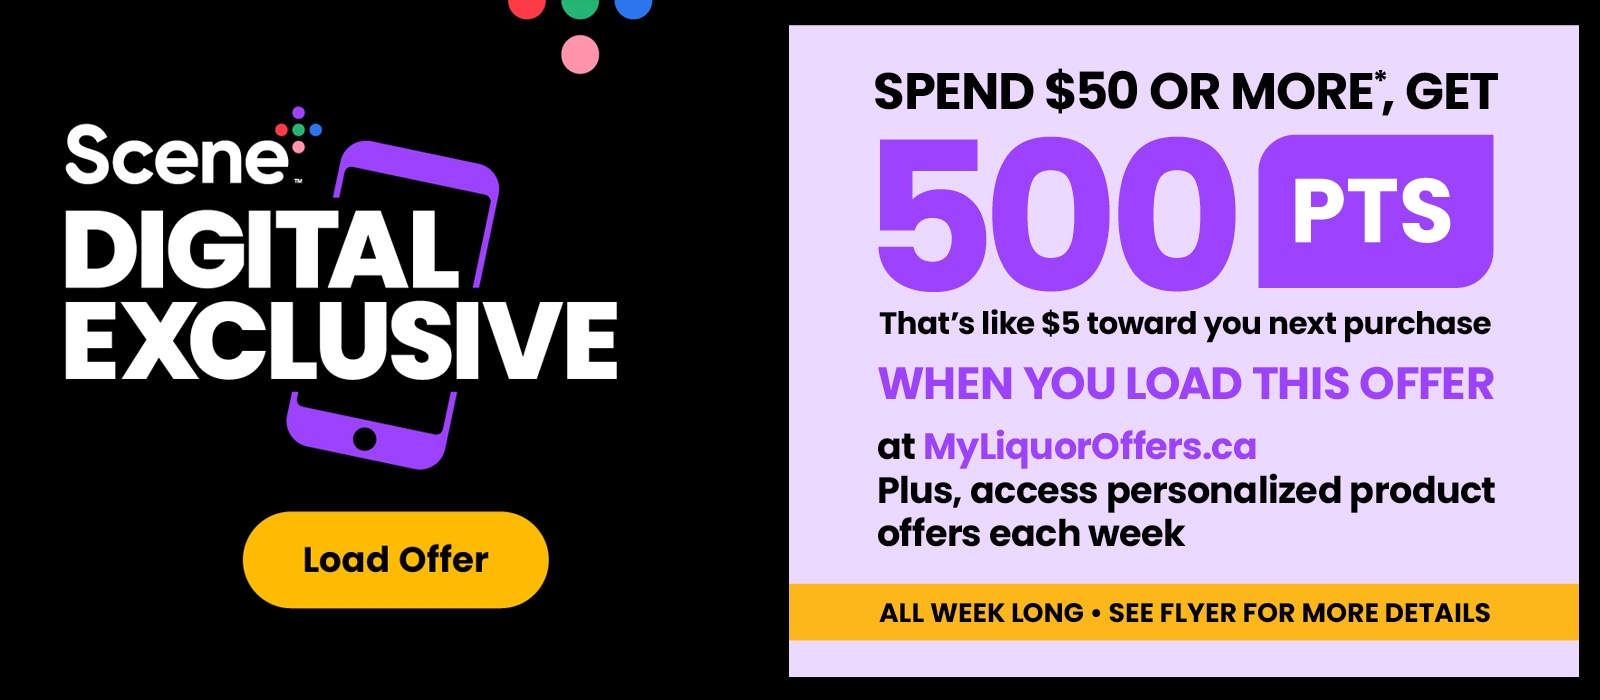 Scene+ Digital Exclusive! Load It to Get It! Spend $50 or more, get 500 PTS when you load this offer at MyLiquorOffers.ca. See flyer for more details.